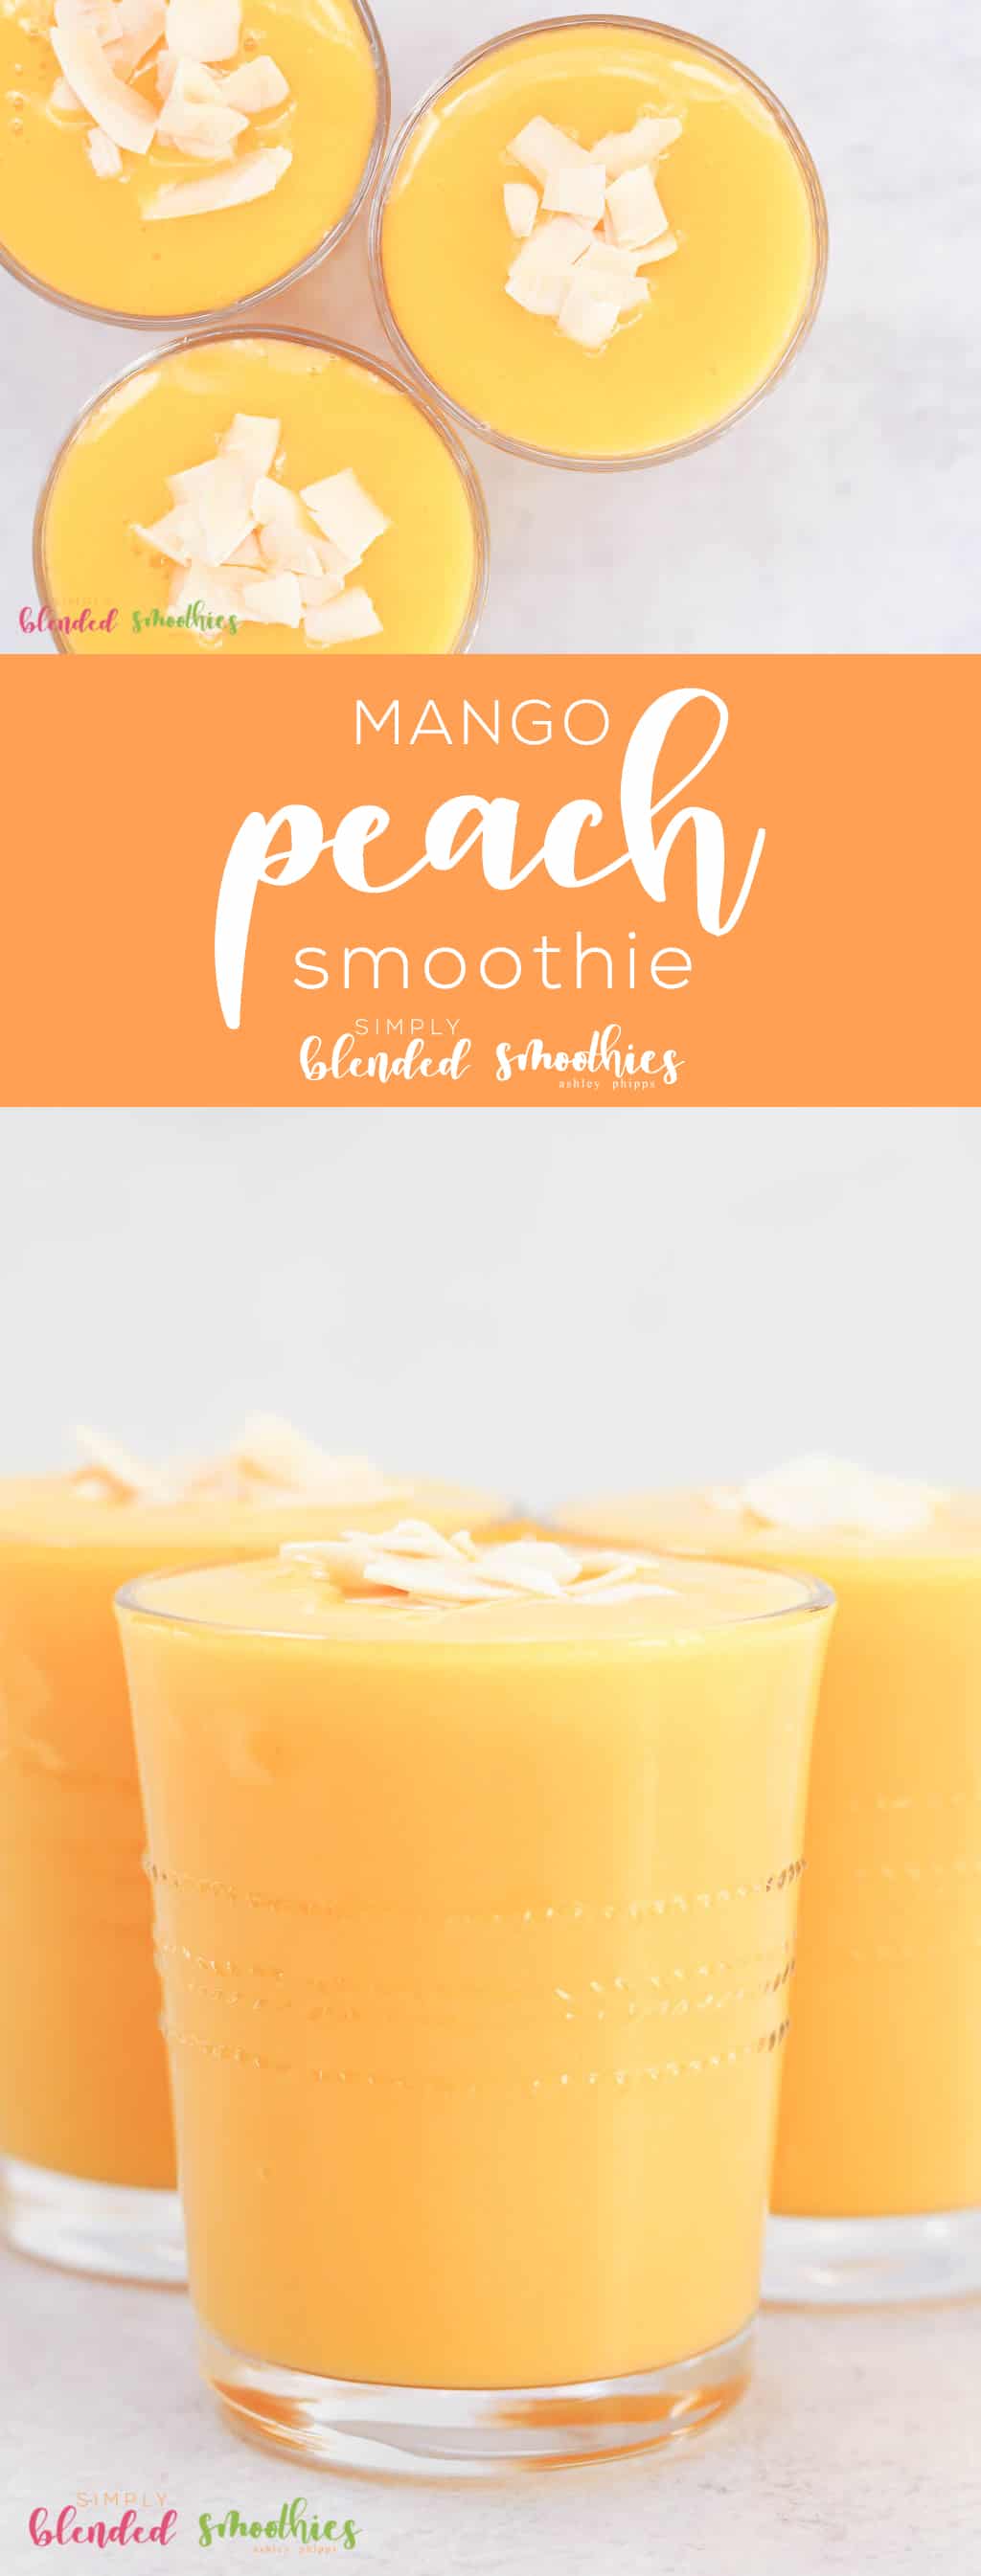 The Tropical Flavors In This Mango Peach Smoothie Are Such A Refreshing And Healthy Smoothie